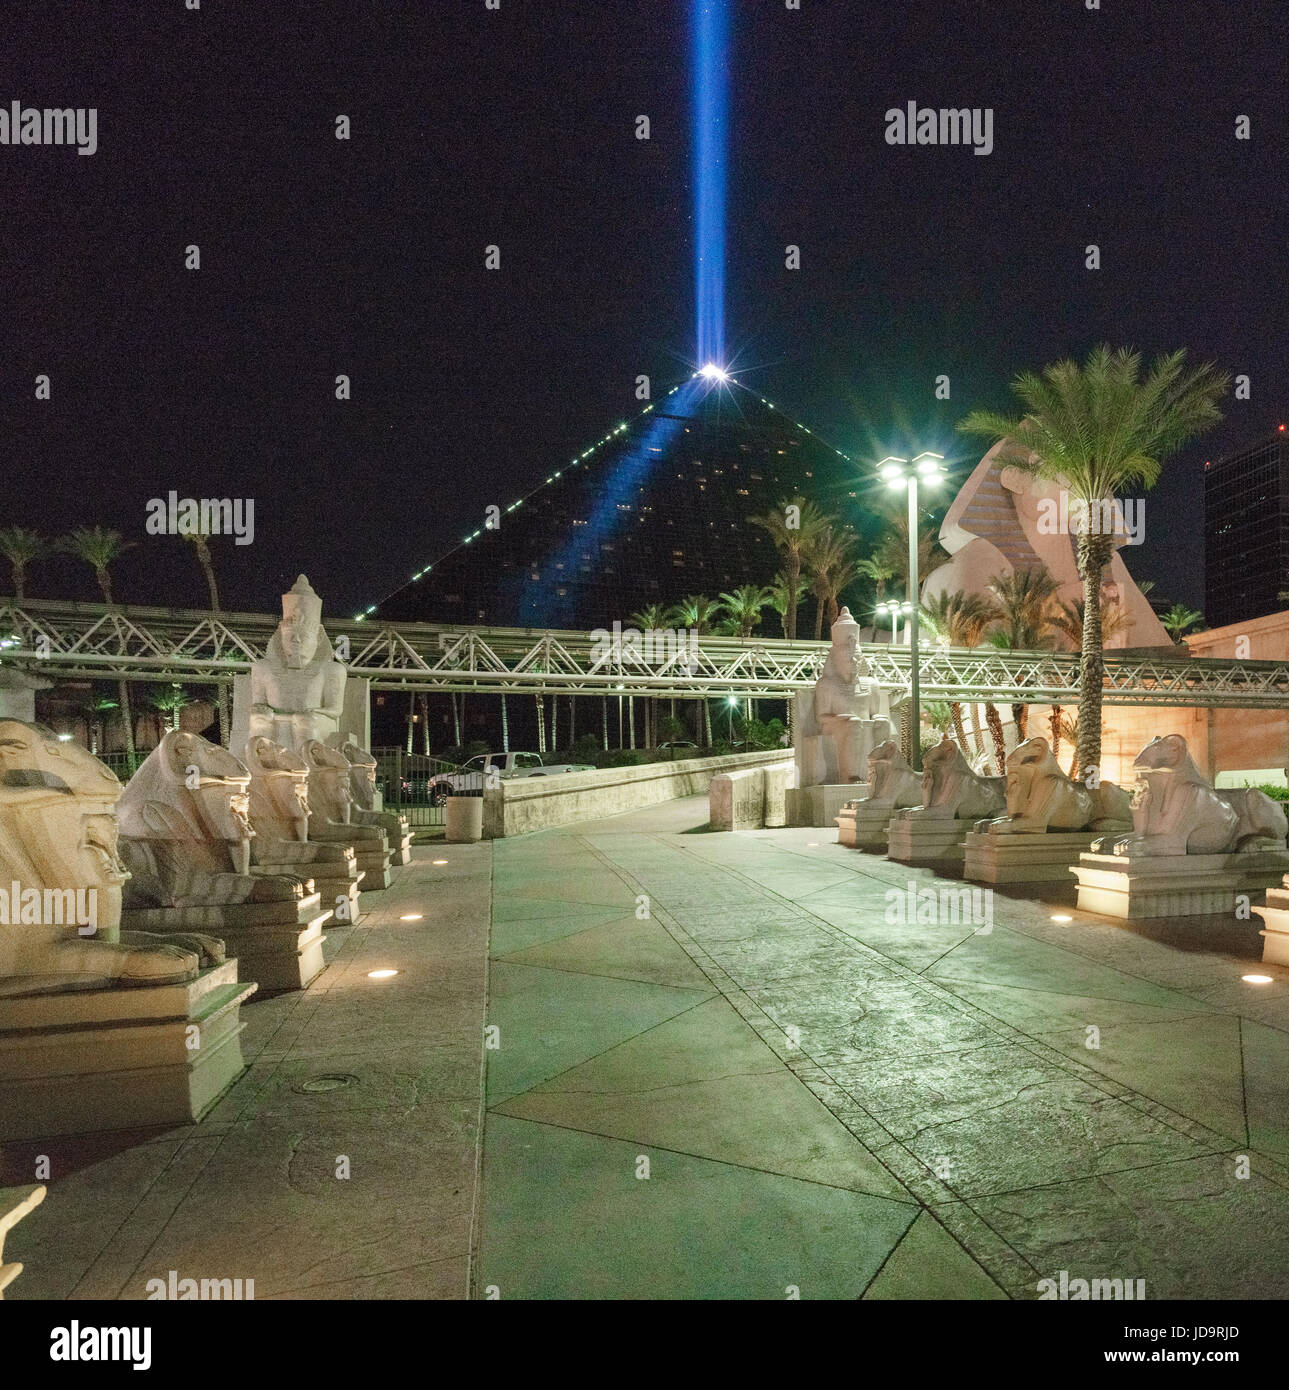 Luxor attraction with pyramid and blue laser beam, Las Vegas, Nevada, USA  Stock Photo - Alamy